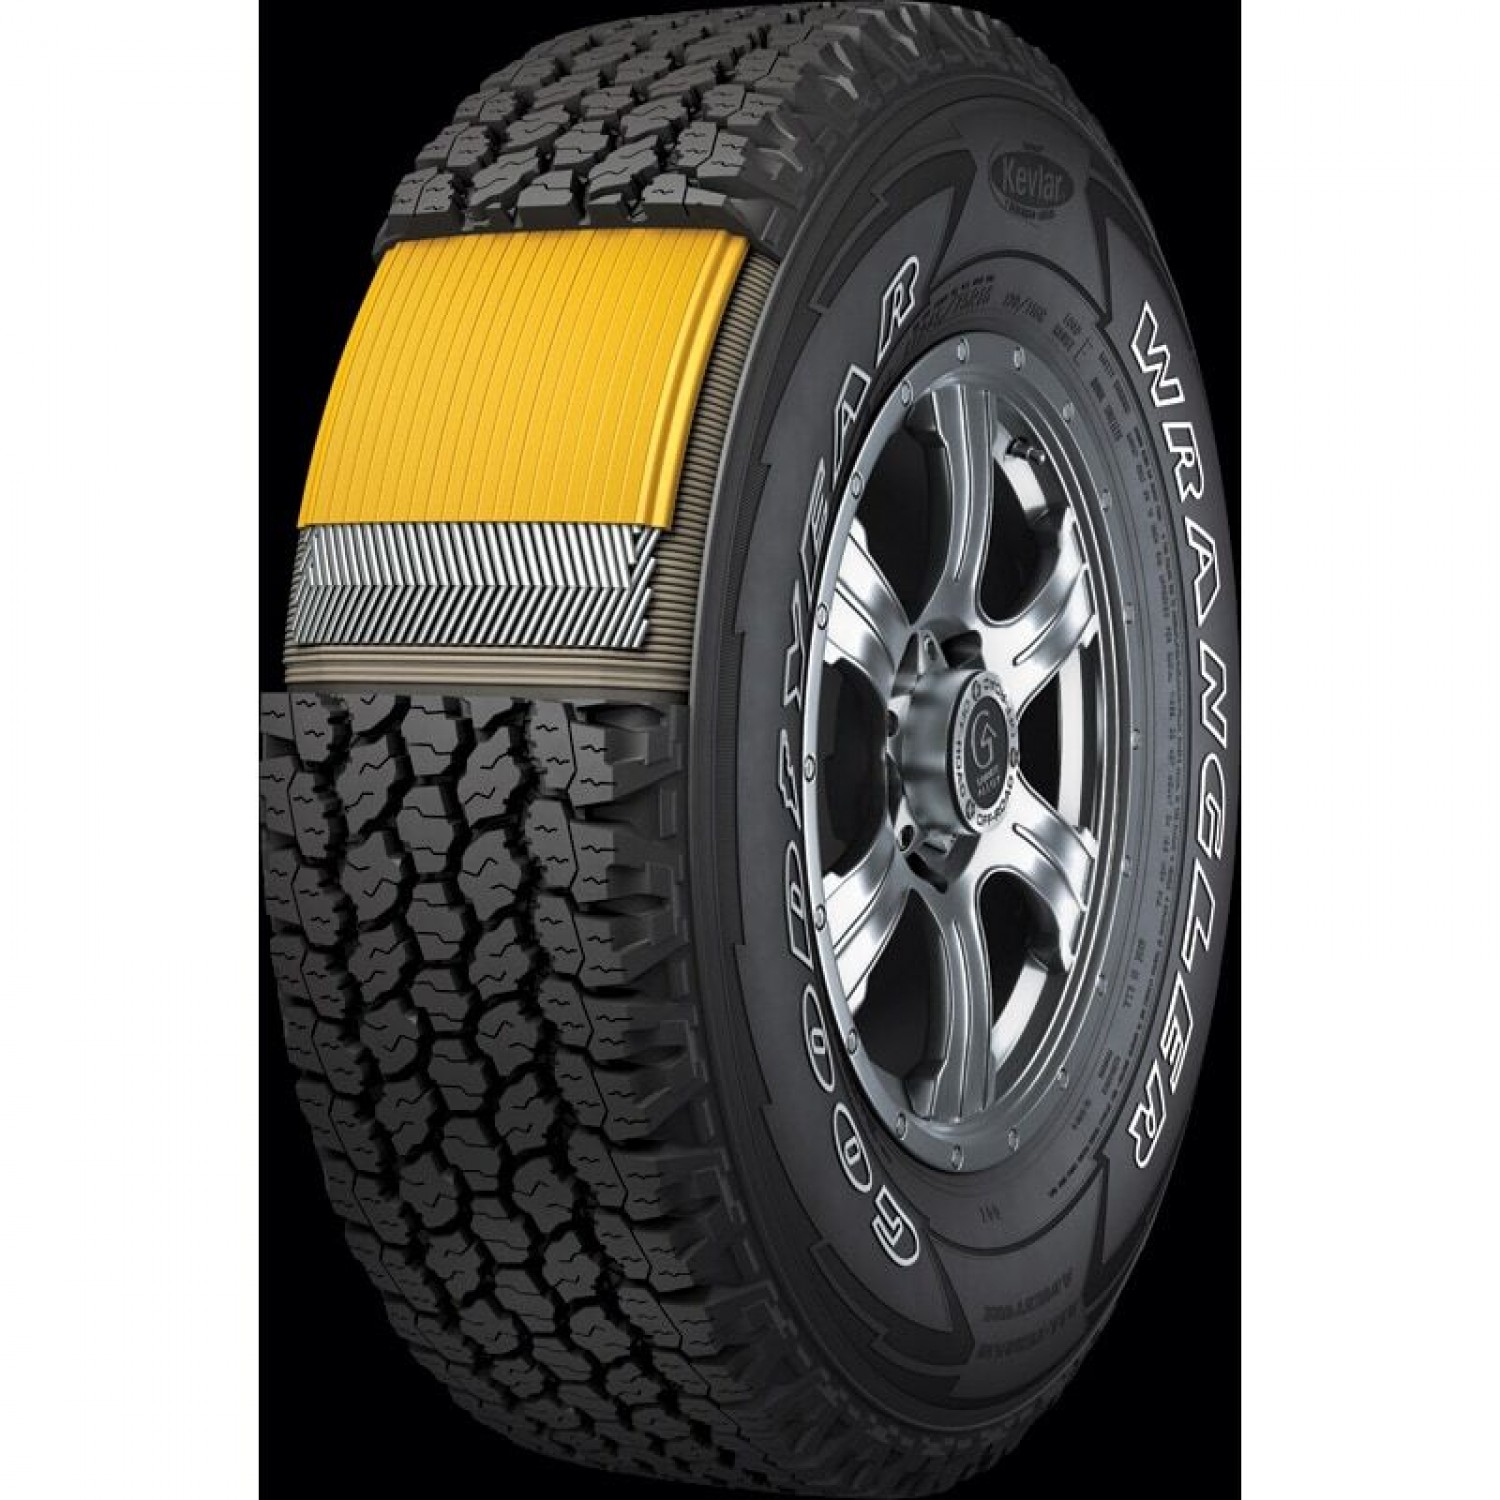 Goodyear Wrangler AT Adventure With Kevlar Outlined White Letters Tire ( LT275/70R18 125R) vzn121180